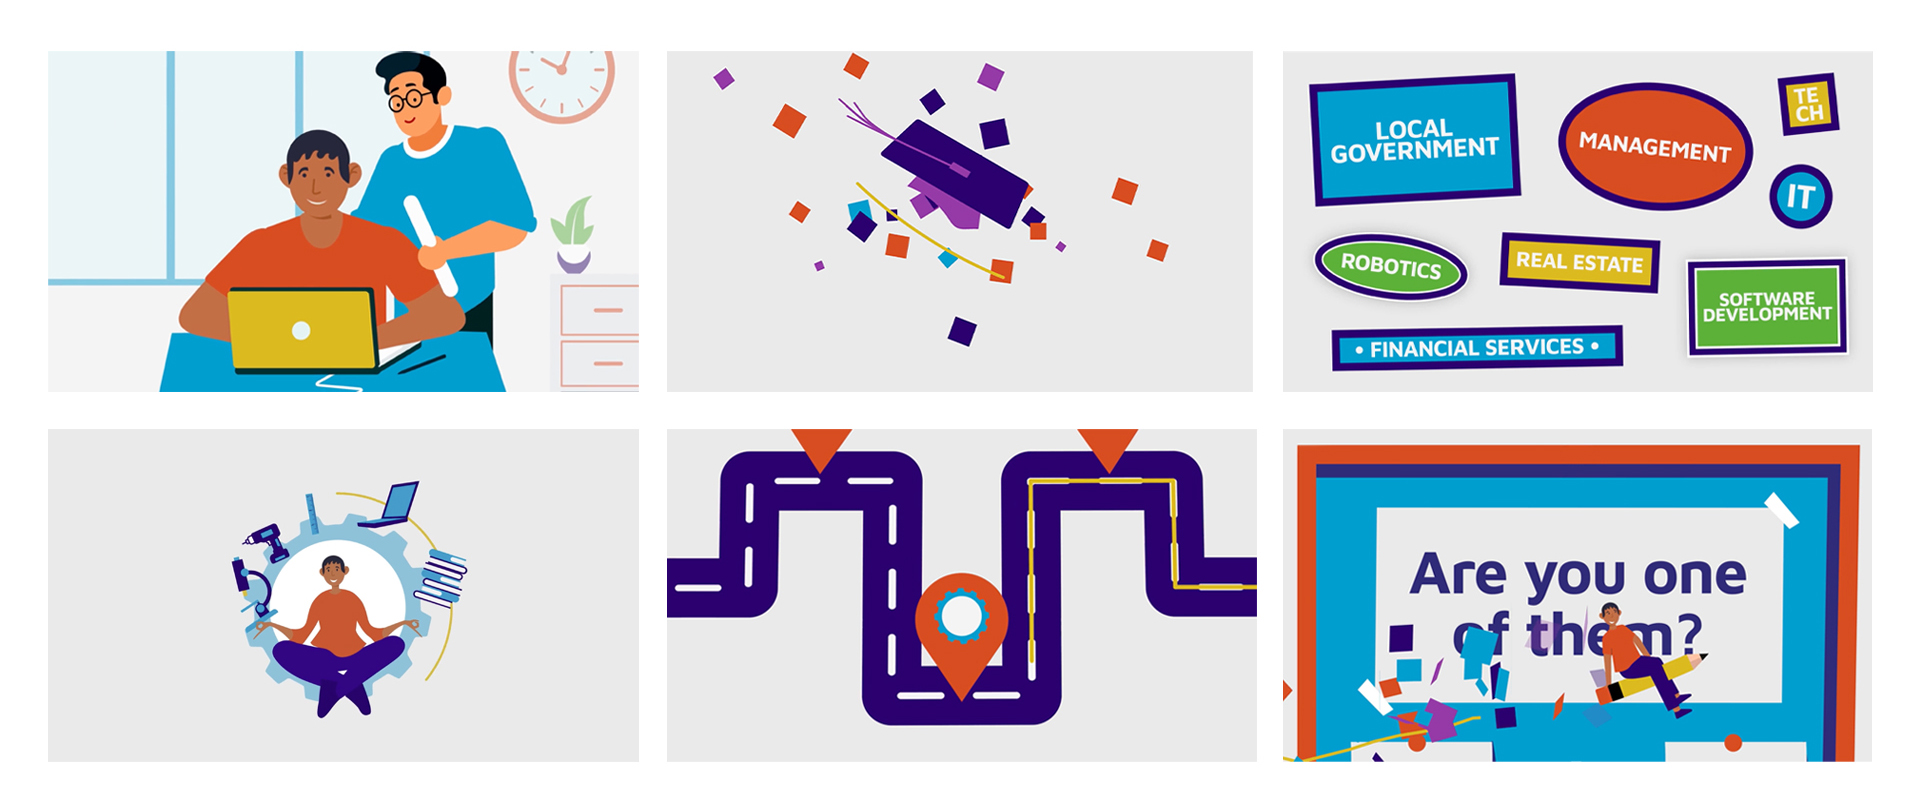 Student sitting at a computer with a teacher standing behind them. Purple graduation cap flying through the air alongside multi-colored confetti. Various colorful shapes with possible career paths written within each, such as Local Government, Real Estate and Robotics. Student sitting cross-legged surrounded by floating learning tools including a laptop, microscope and drill. A roadmap graphic with purple roads and orange bubbles pinpointing specific locations. Miniature student riding on a flying pencil in front of a poster that reads “Are you one of them?”